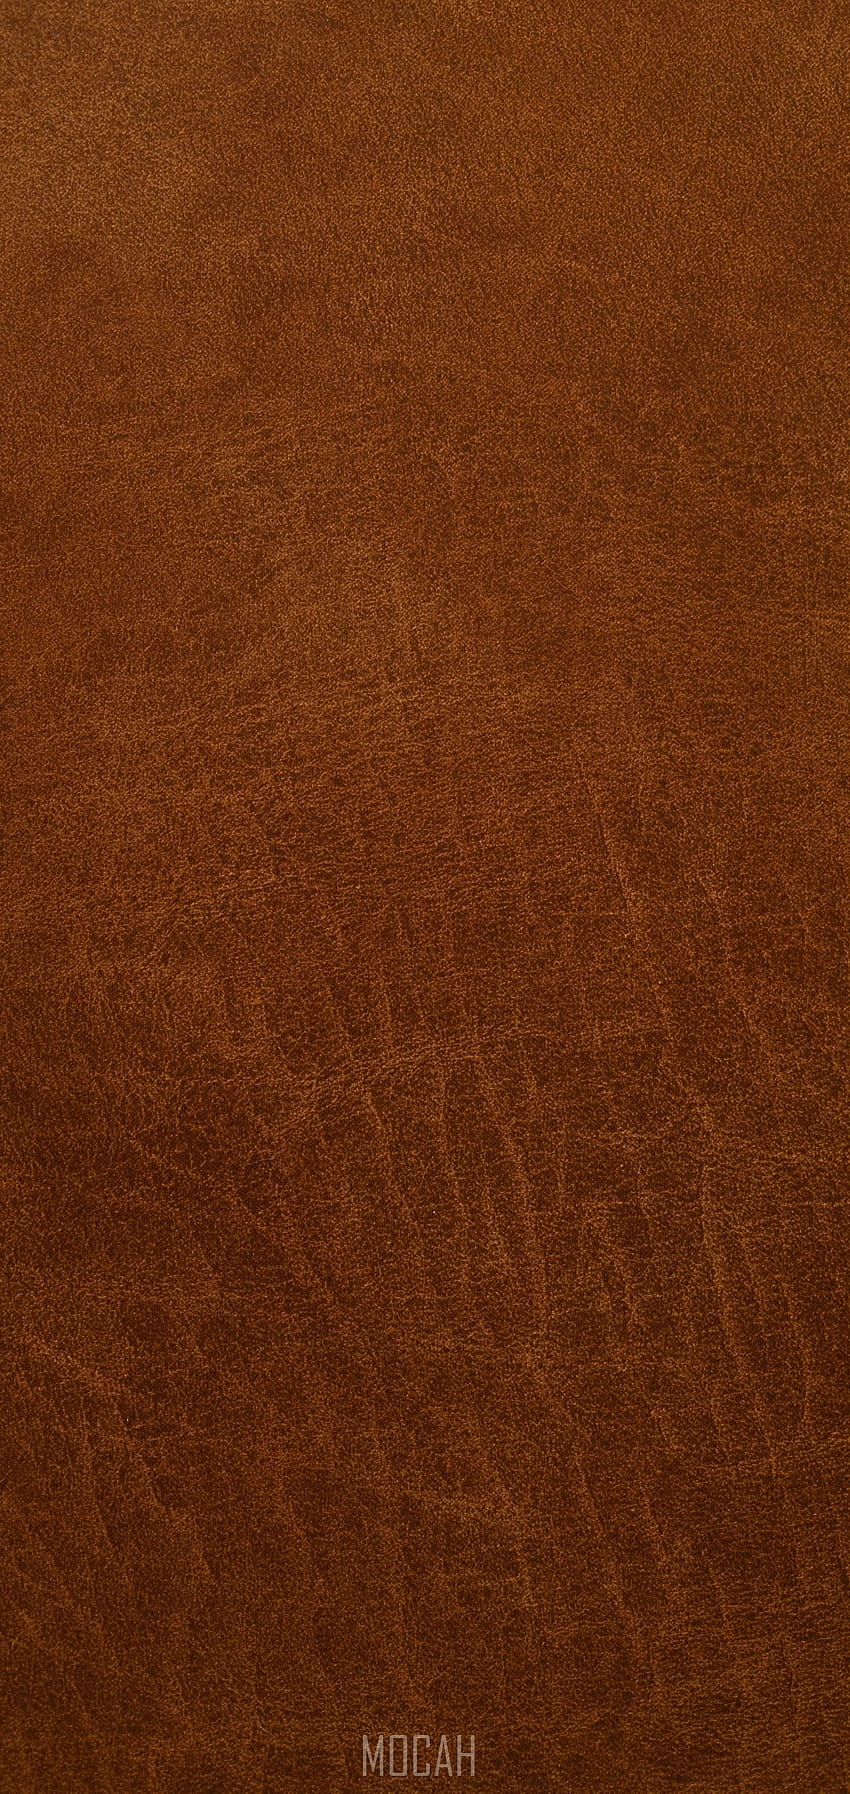 293074 Leather, Brown, Wood, Caramel Color, Plywood, Oppo R15 full , 1080x2280, color leather HD phone wallpaper